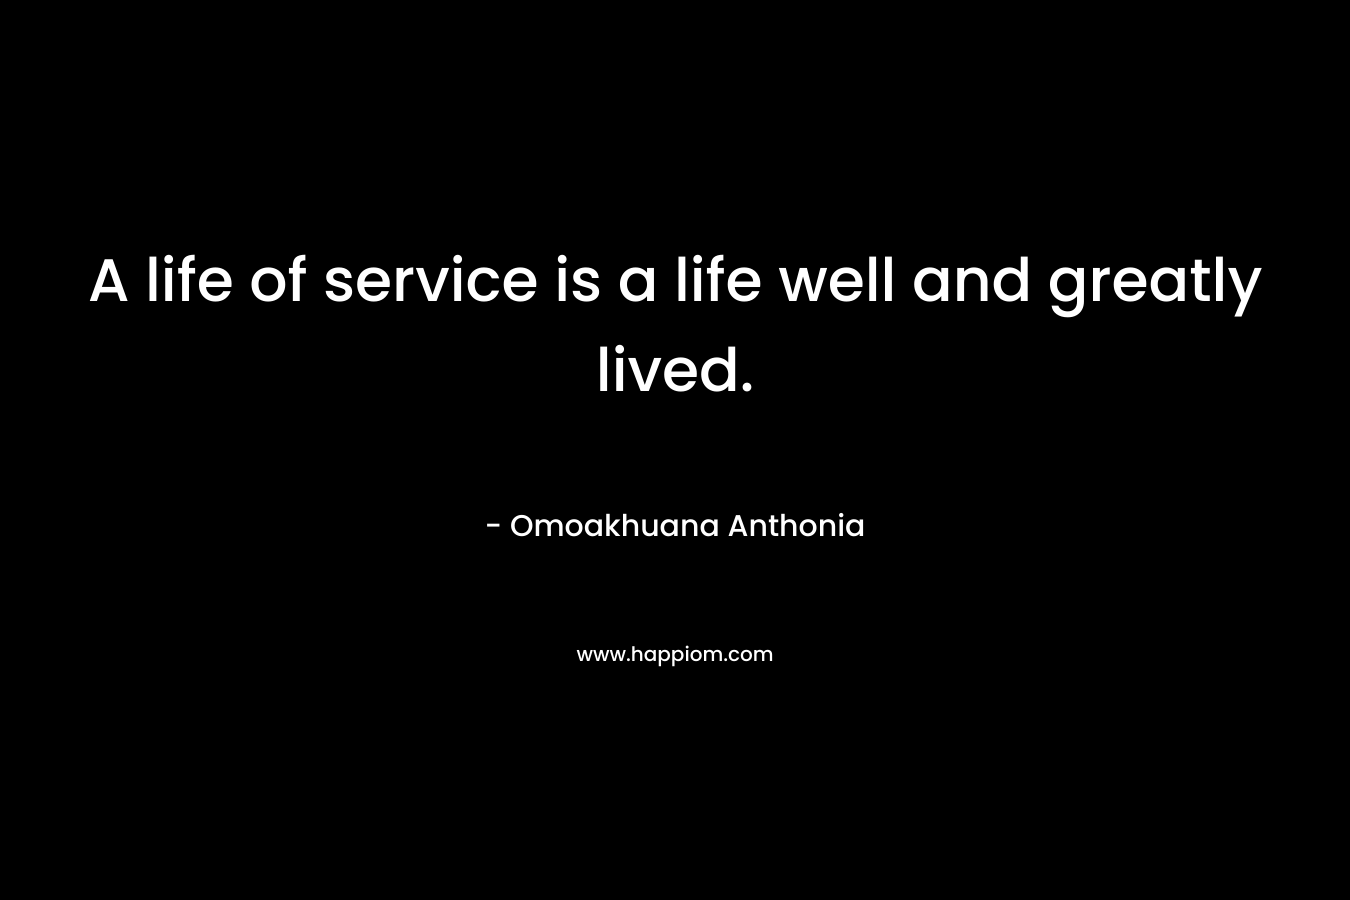 A life of service is a life well and greatly lived. – Omoakhuana Anthonia